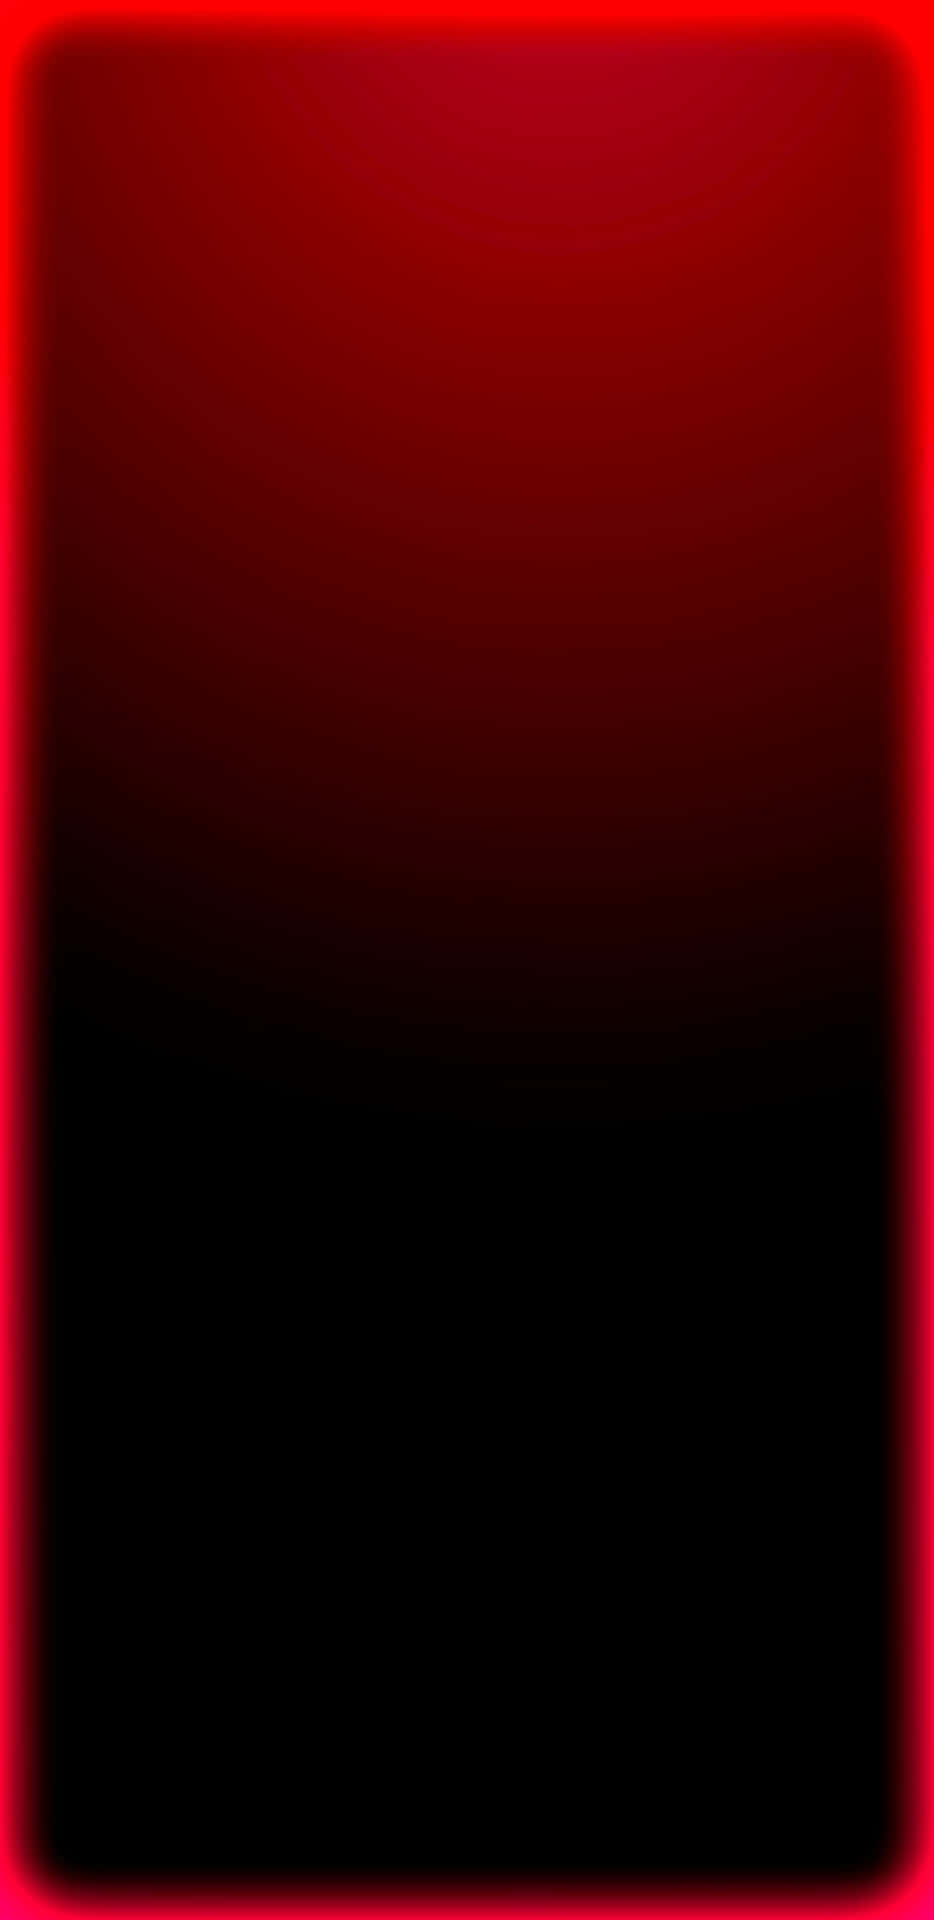 Red Gradient With Border Background